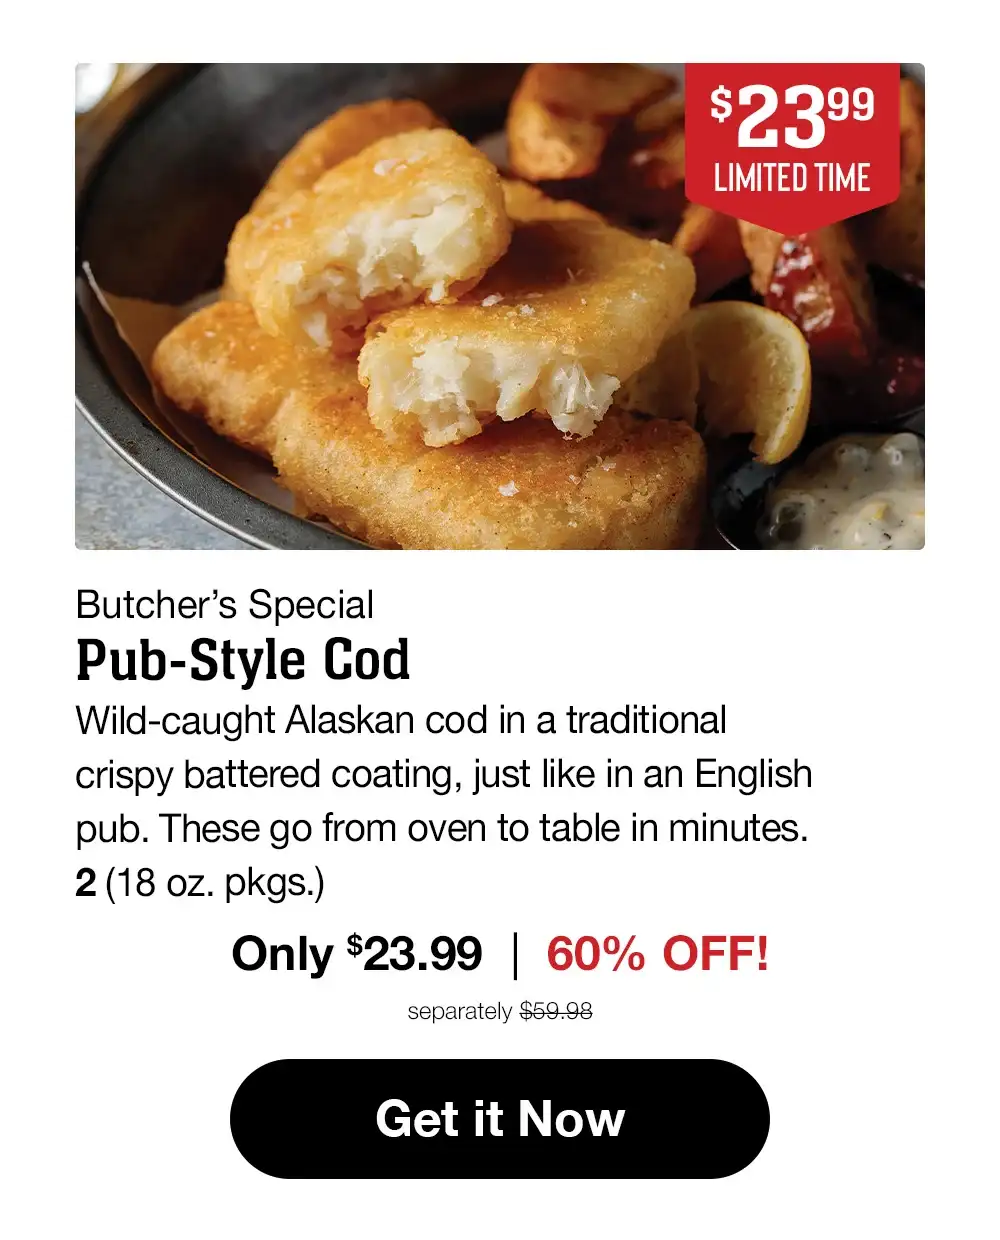 Butcher's Special | Pub-Style Cod - Wild-caught Alaskan cod in a traditional crispy battered coating, just like in an English pub. These go from oven to table in minutes. 2 (18 oz. pkgs.) Only \\$23.99 | 60% off! separately \\$59.98